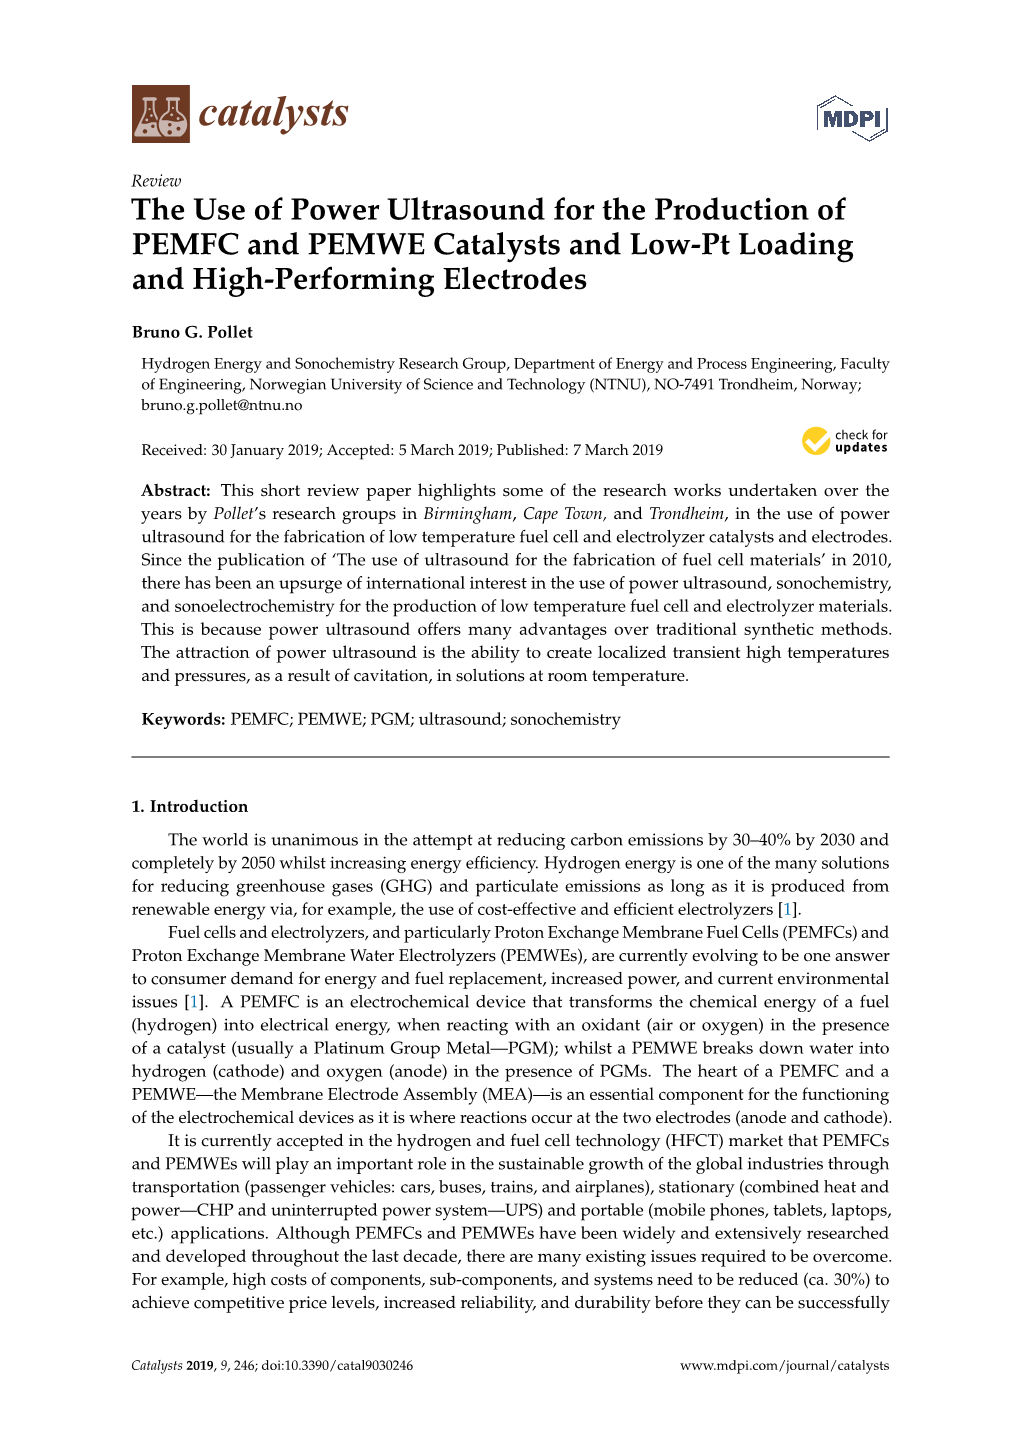 The Use of Power Ultrasound for the Production of PEMFC and PEMWE Catalysts and Low-Pt Loading and High-Performing Electrodes